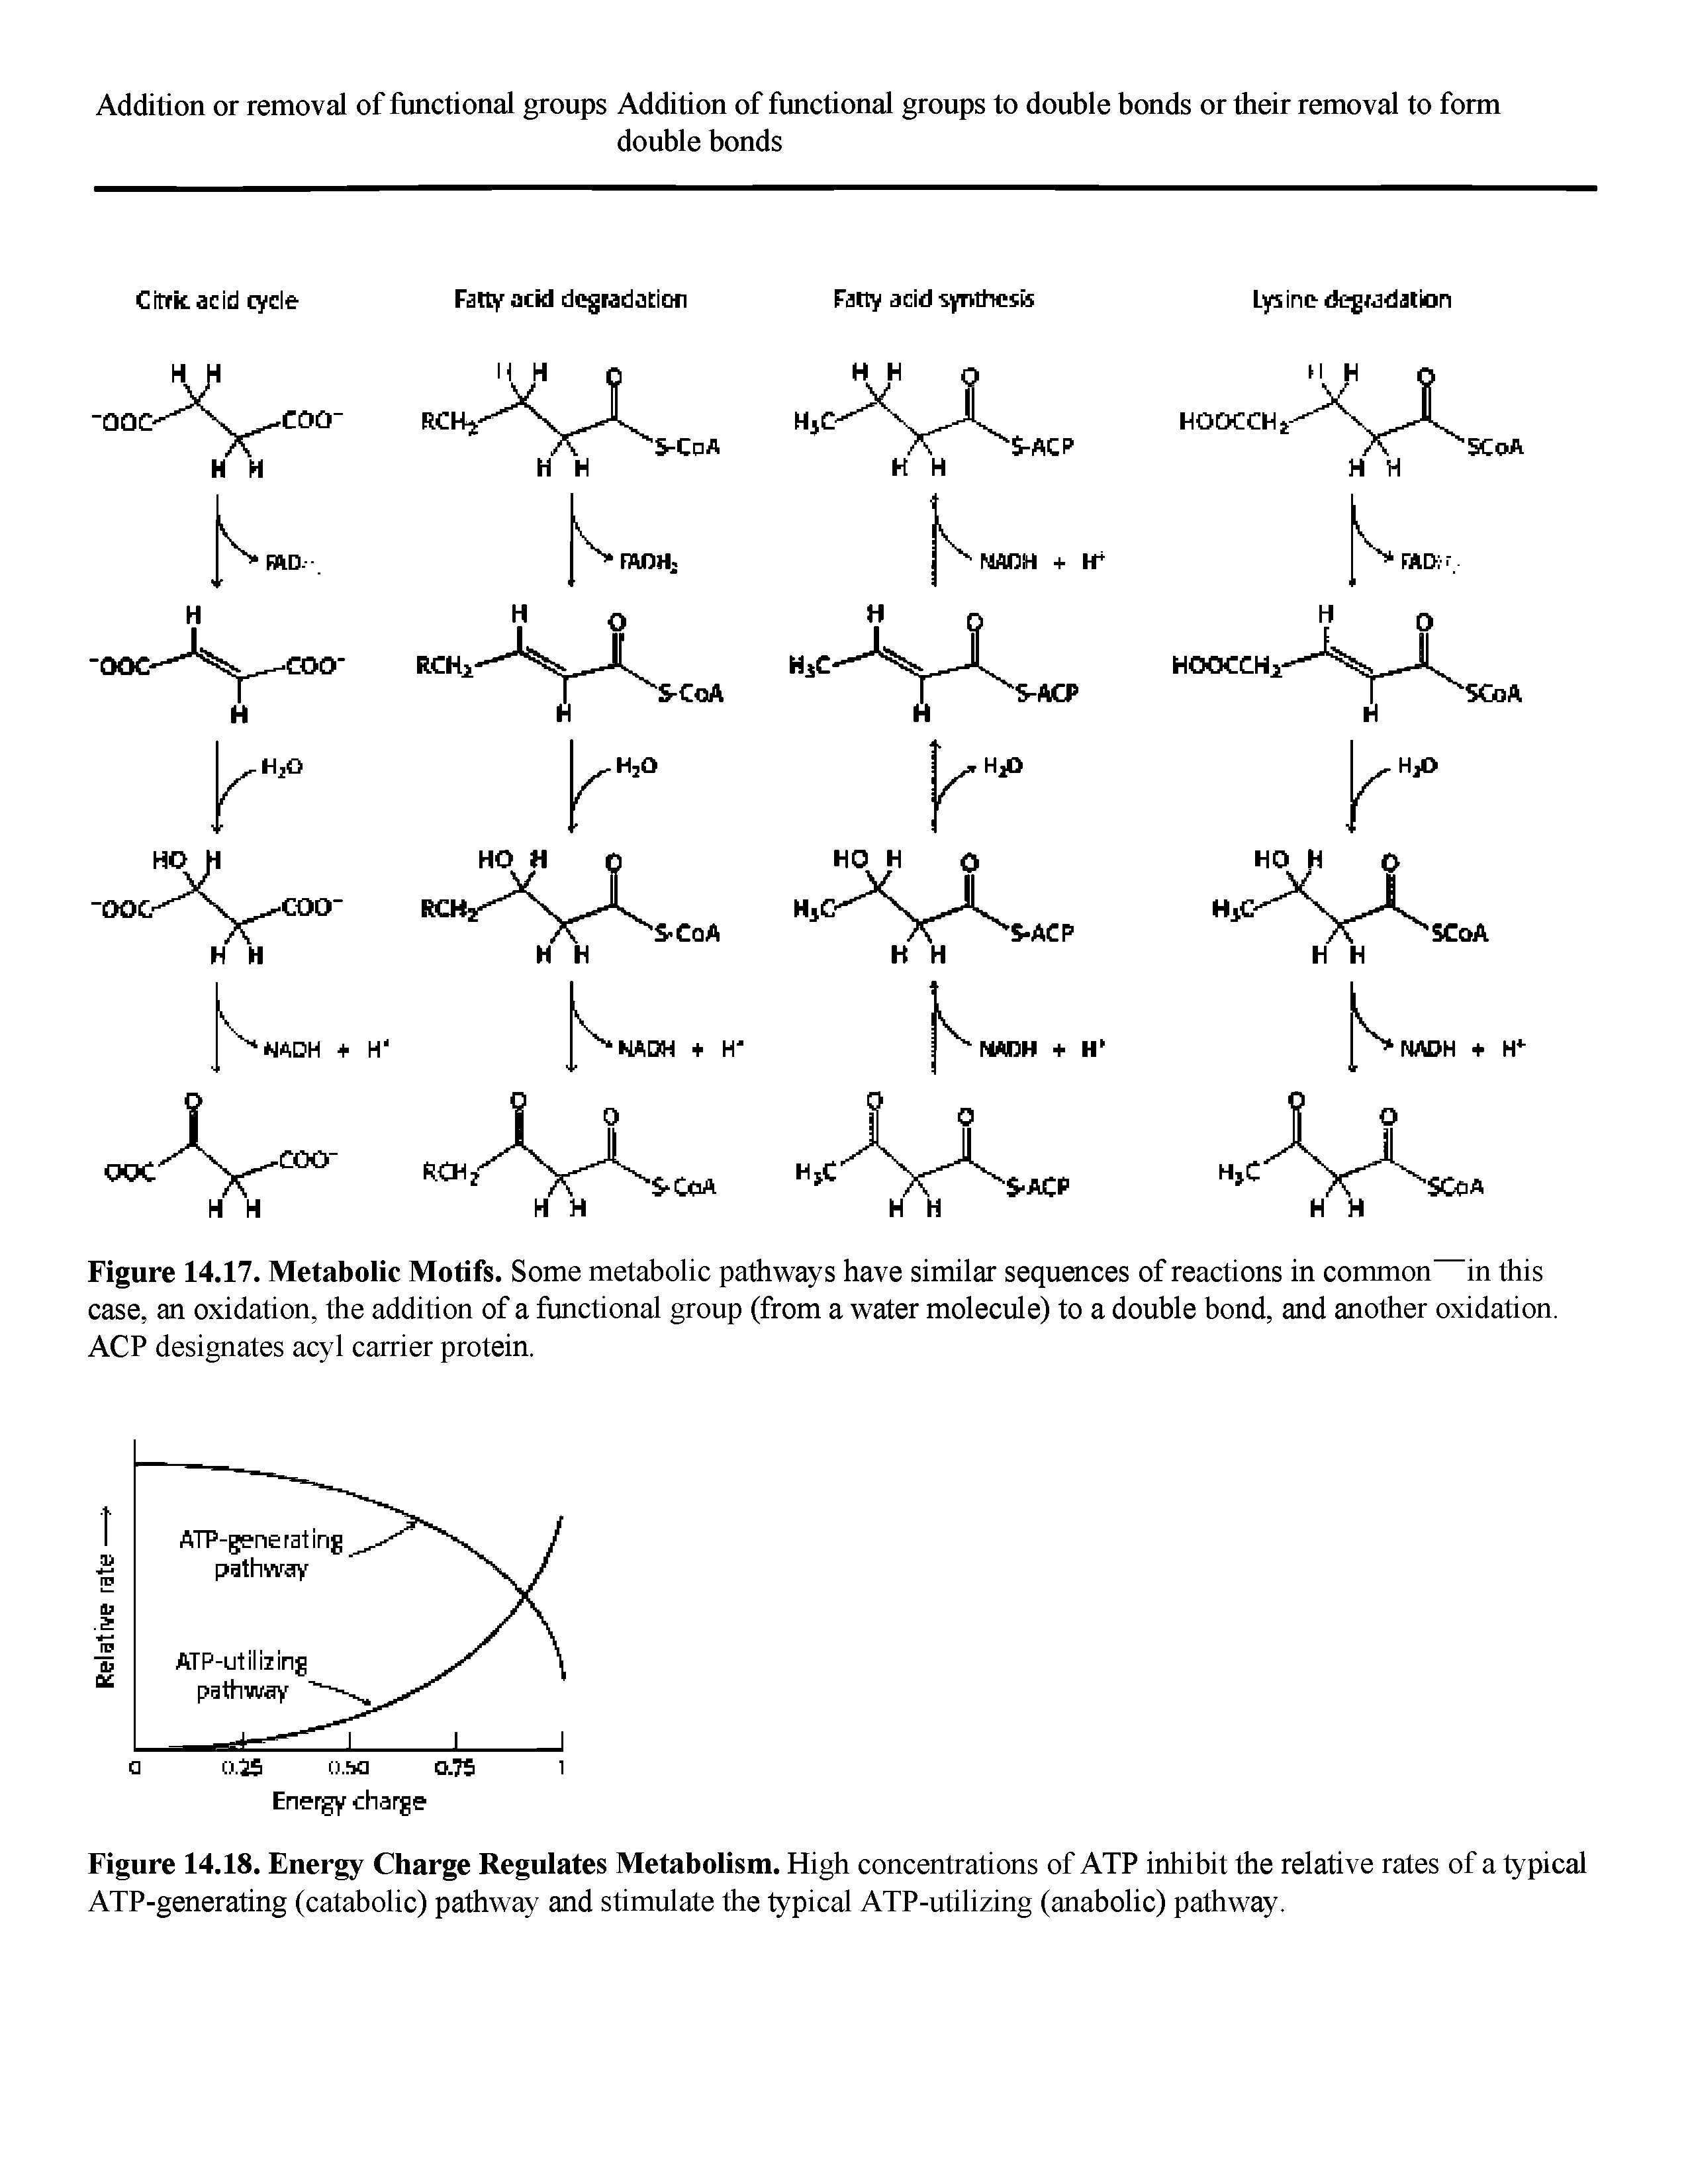 Figure 14.17. Metabolic Motifs. Some metabolic path vays have similar sequences of reactions in common in this case, an oxidation, the addition of a functional group (from a vv ater molecule) to a double bond, and another oxidation. ACP designates acyl carrier protein.